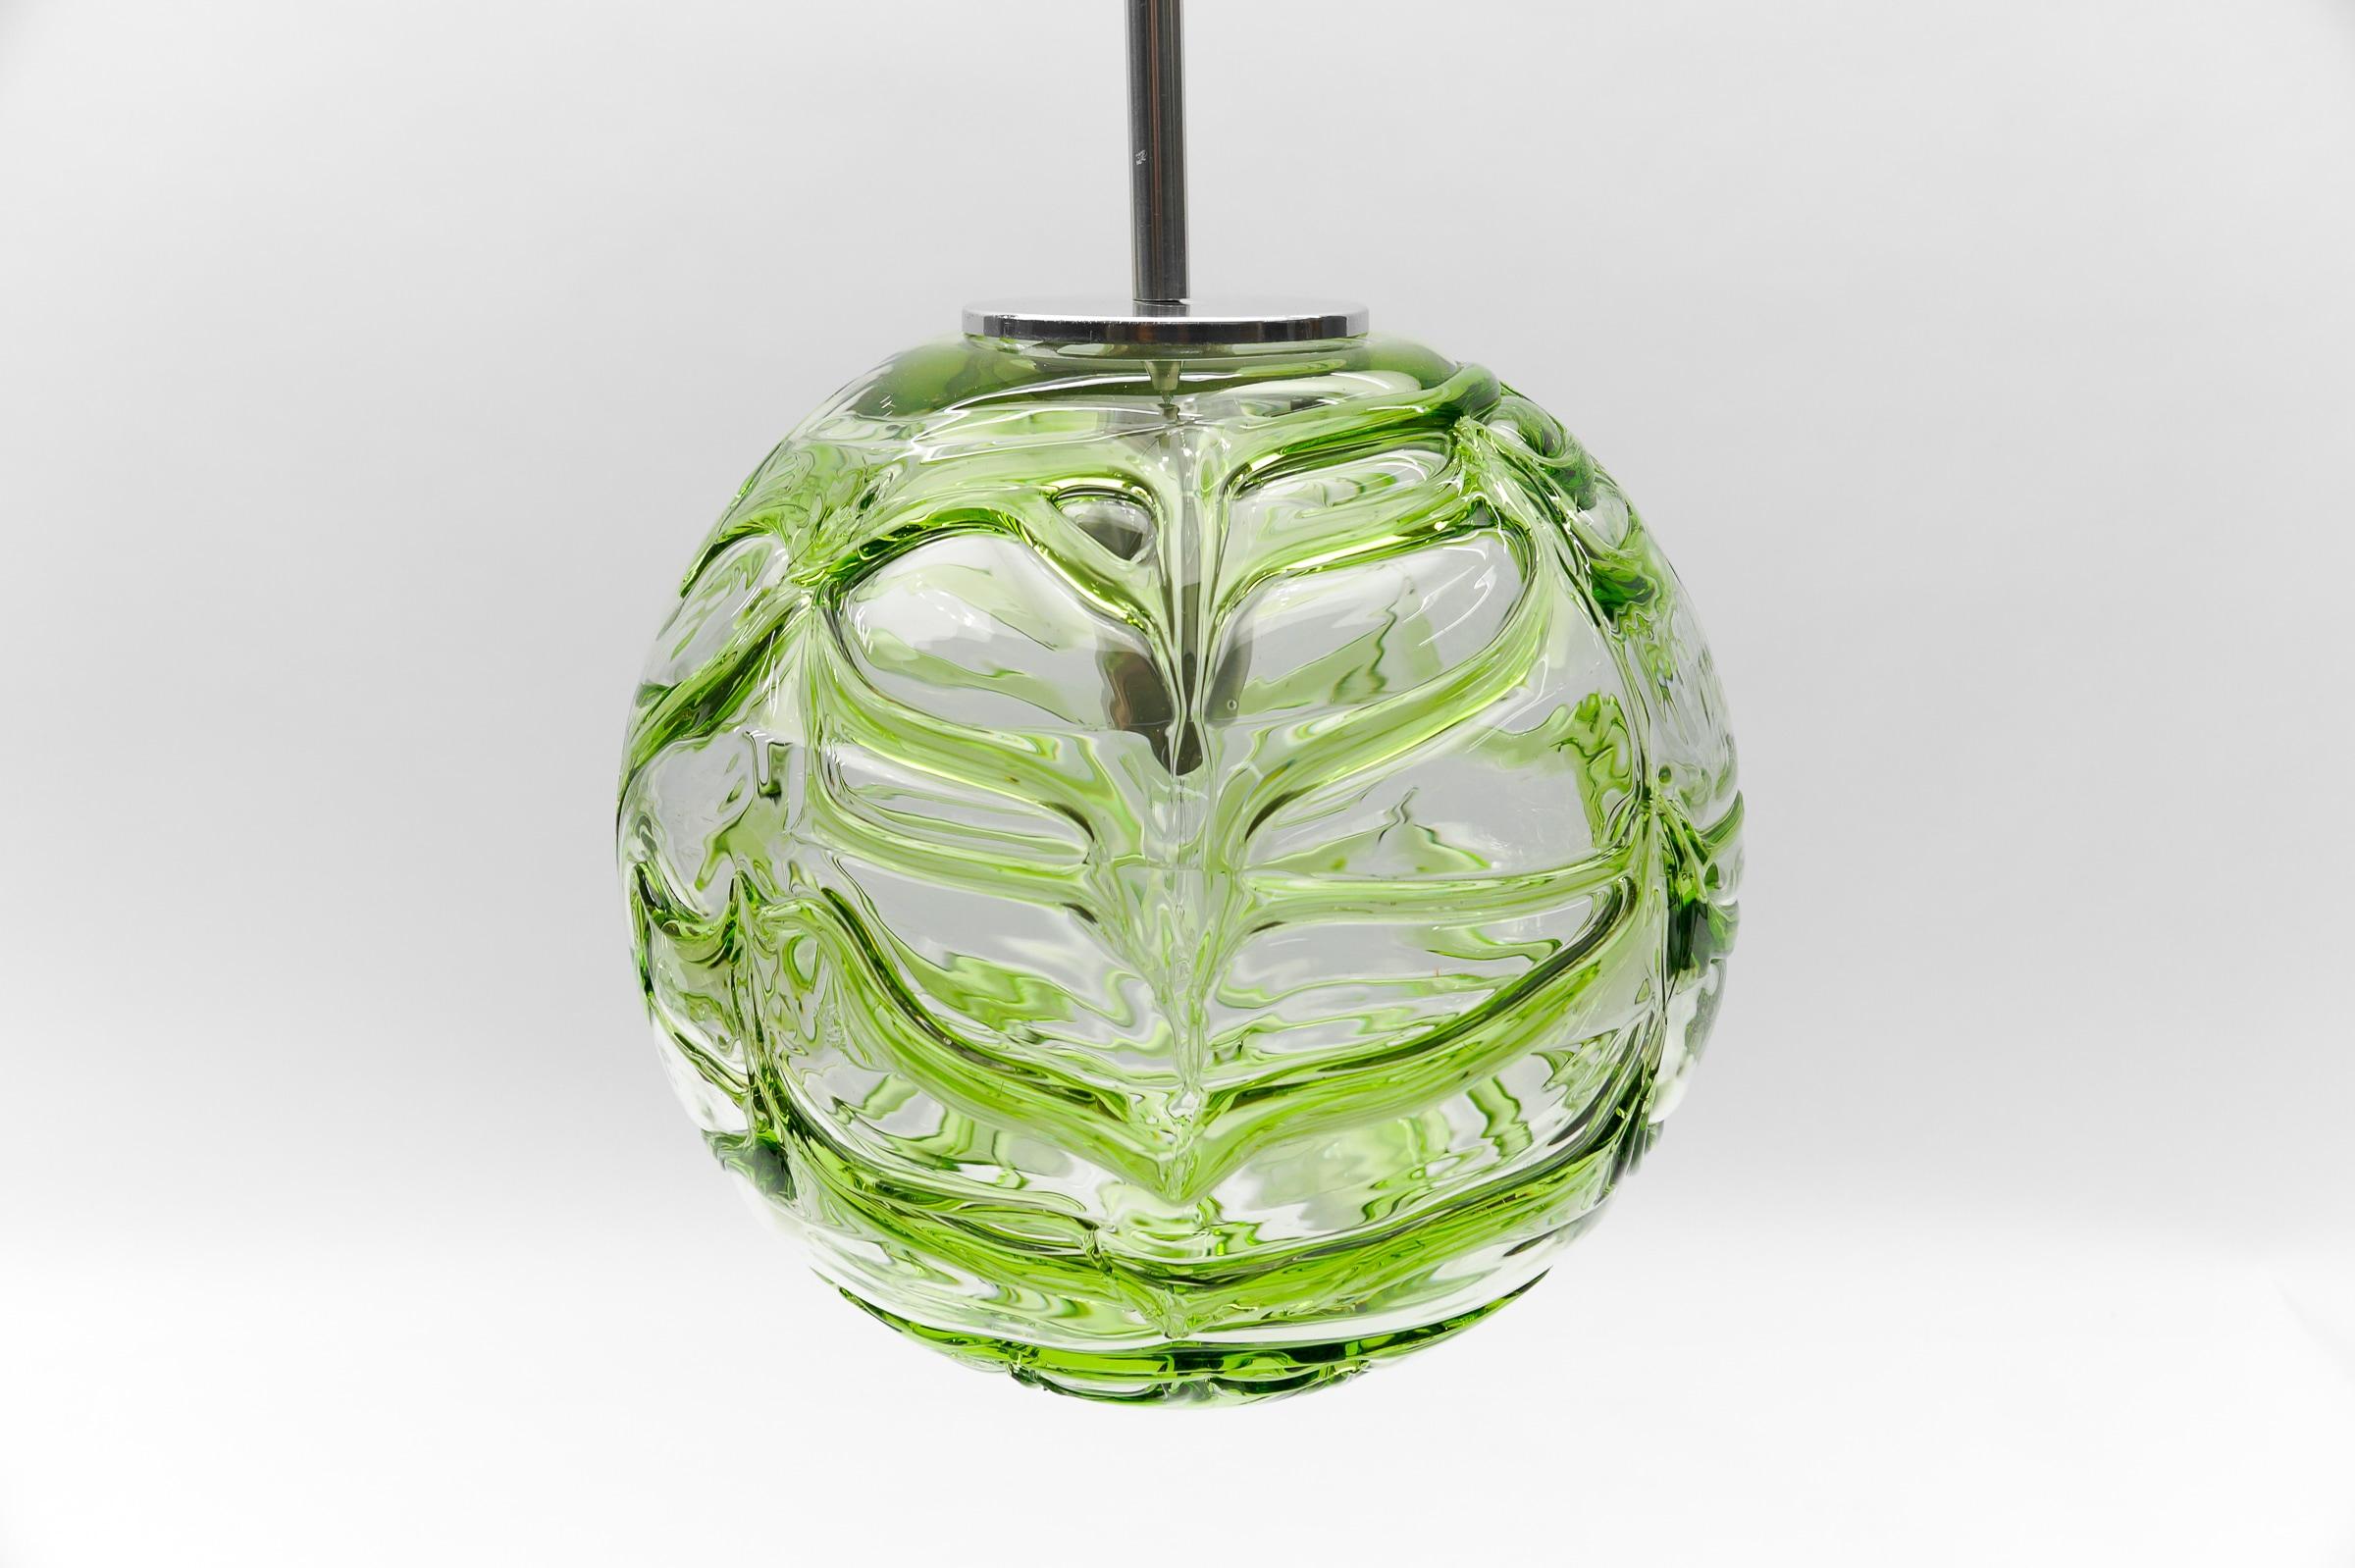 Large Green Murano Glass Ball Pendant Lamp by Doria, - 1960s Germany For Sale 2